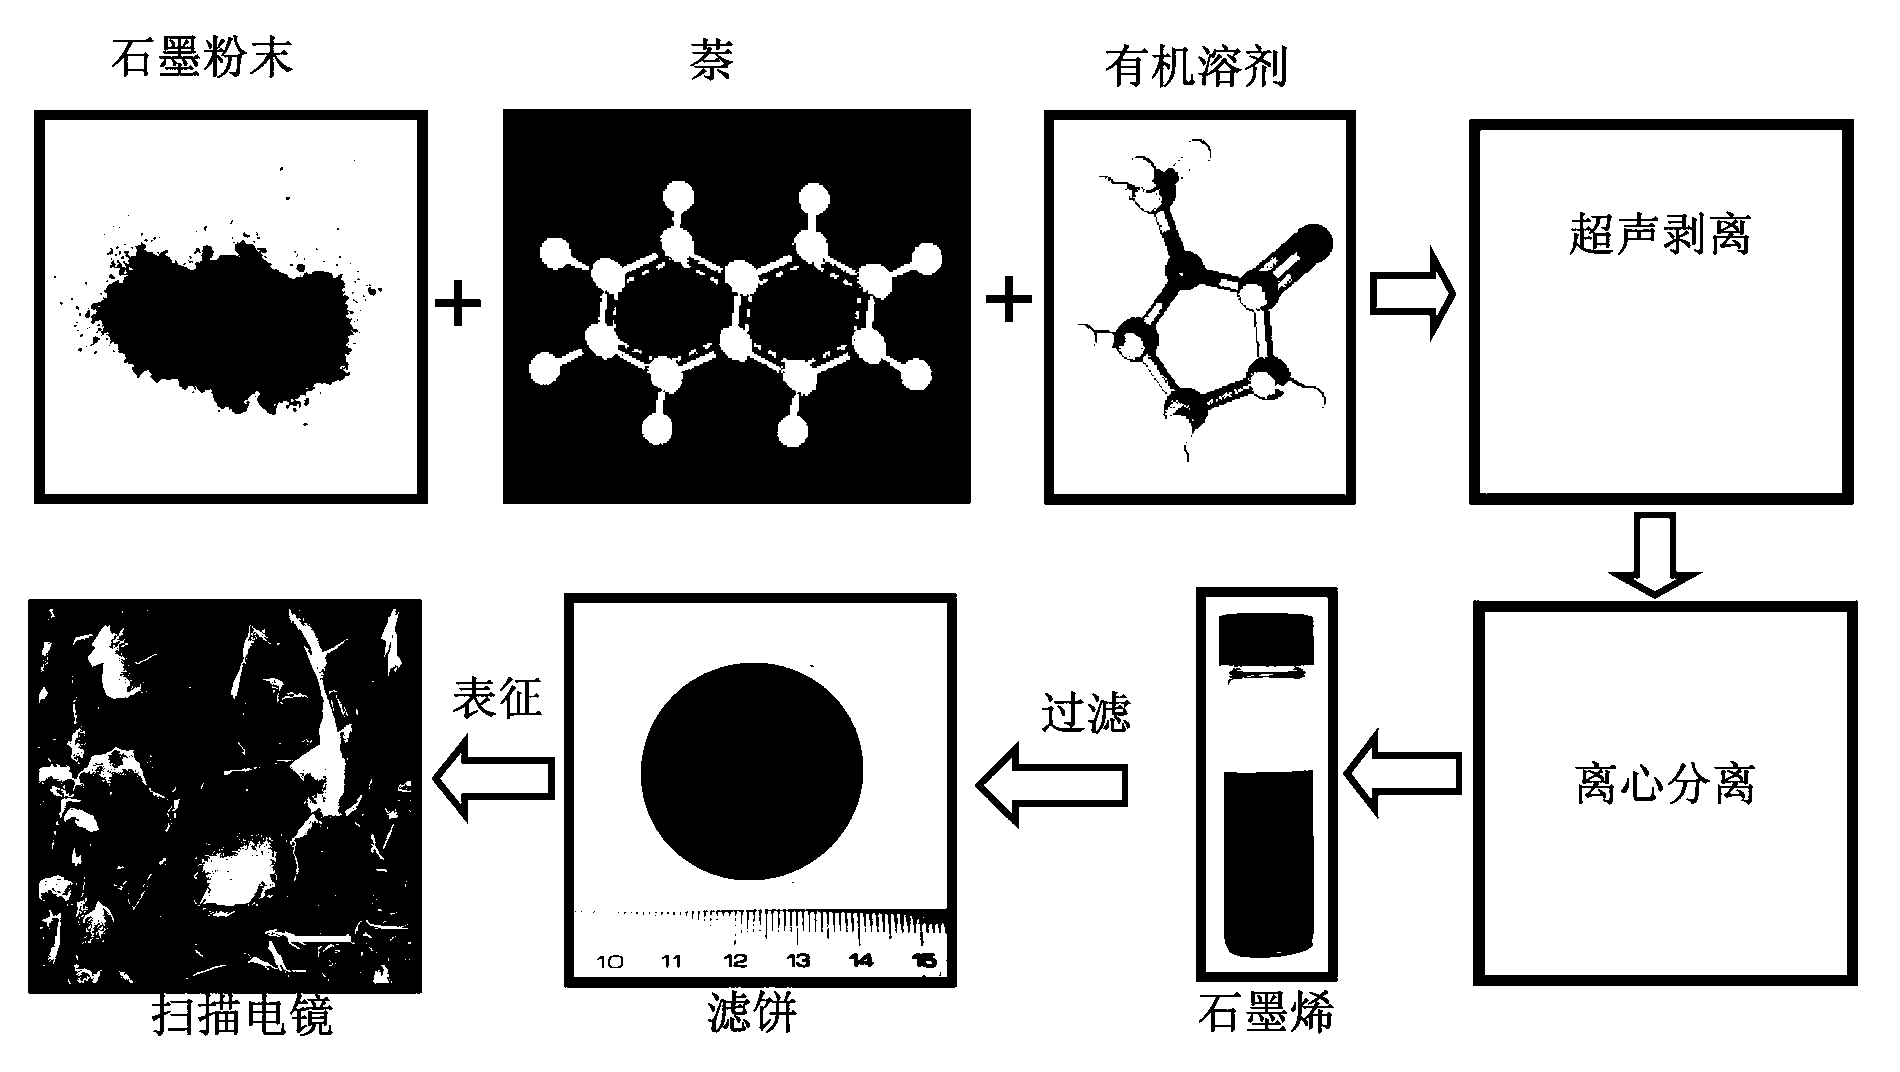 Method for preparing graphene through carrying out ultrasonic stripping on graphite